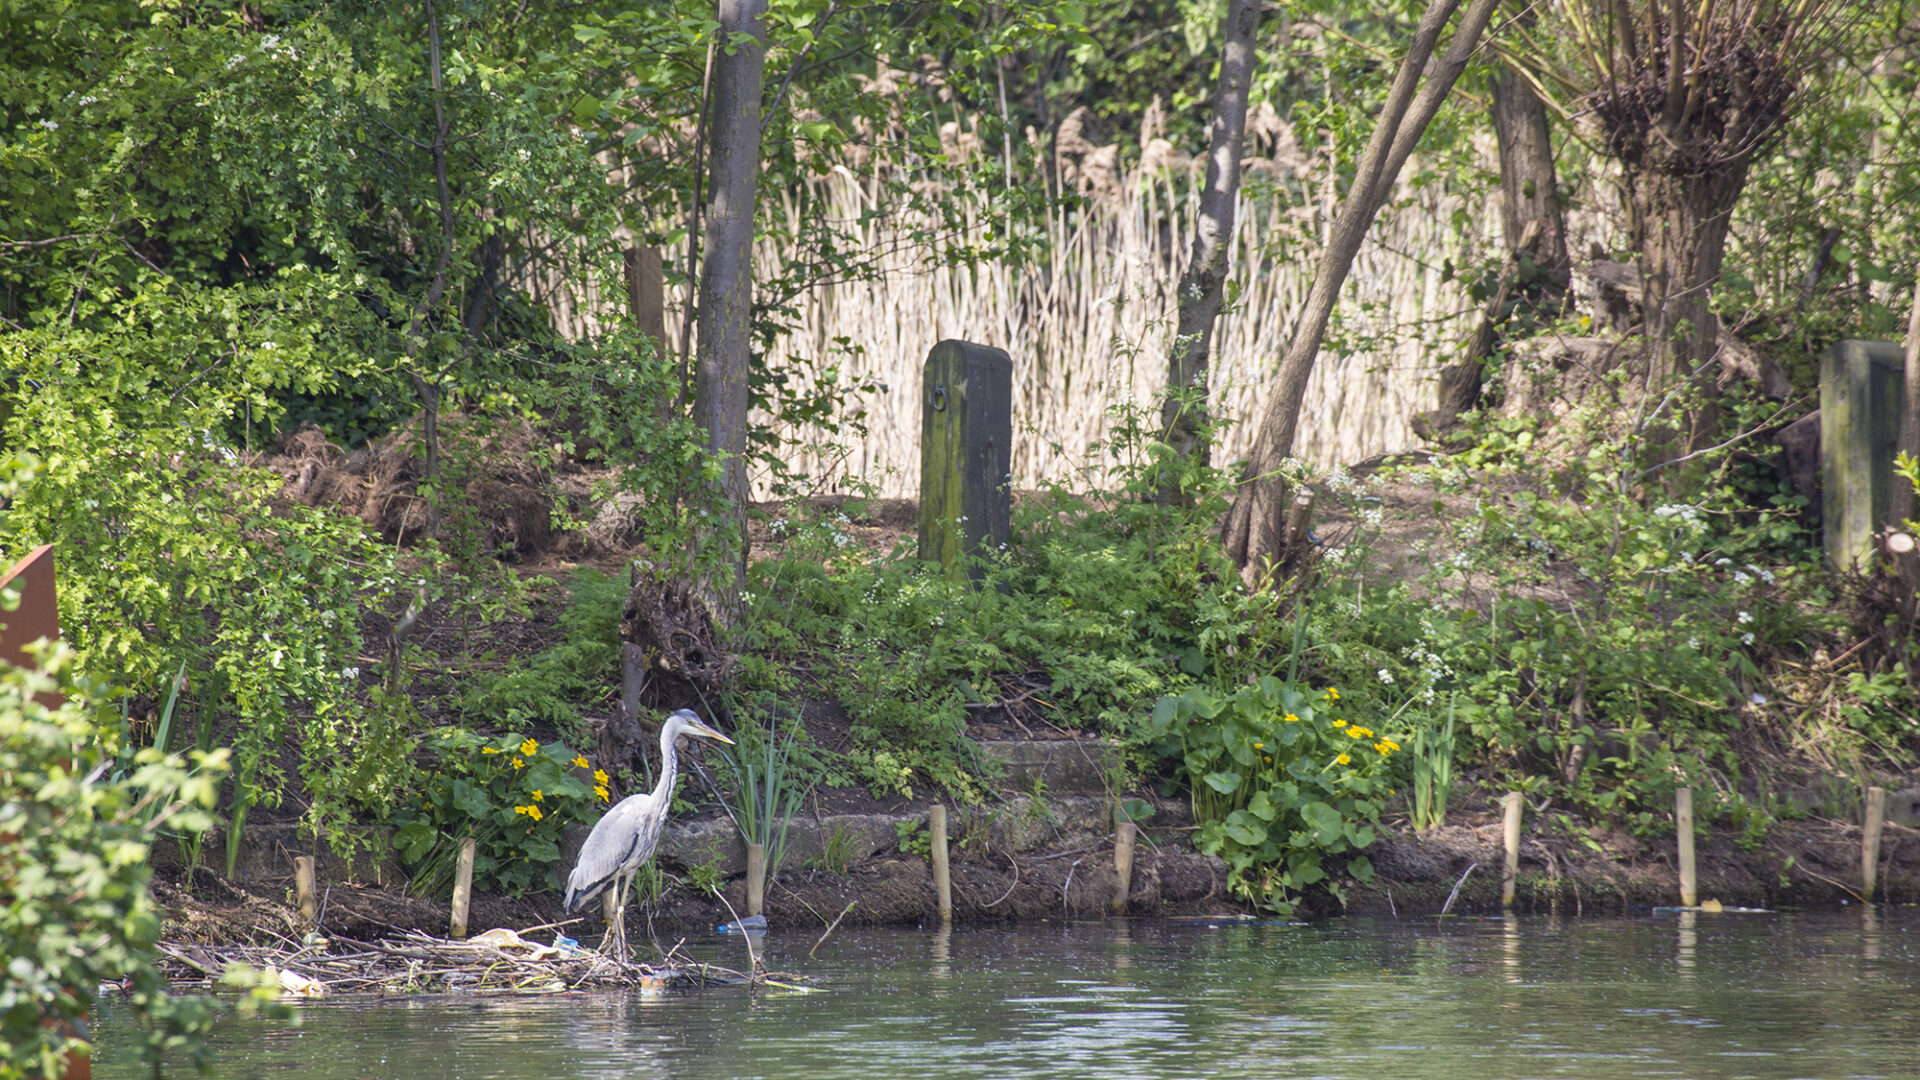 A heron fishing on The Regent's Canal beside Camley St Nature Park